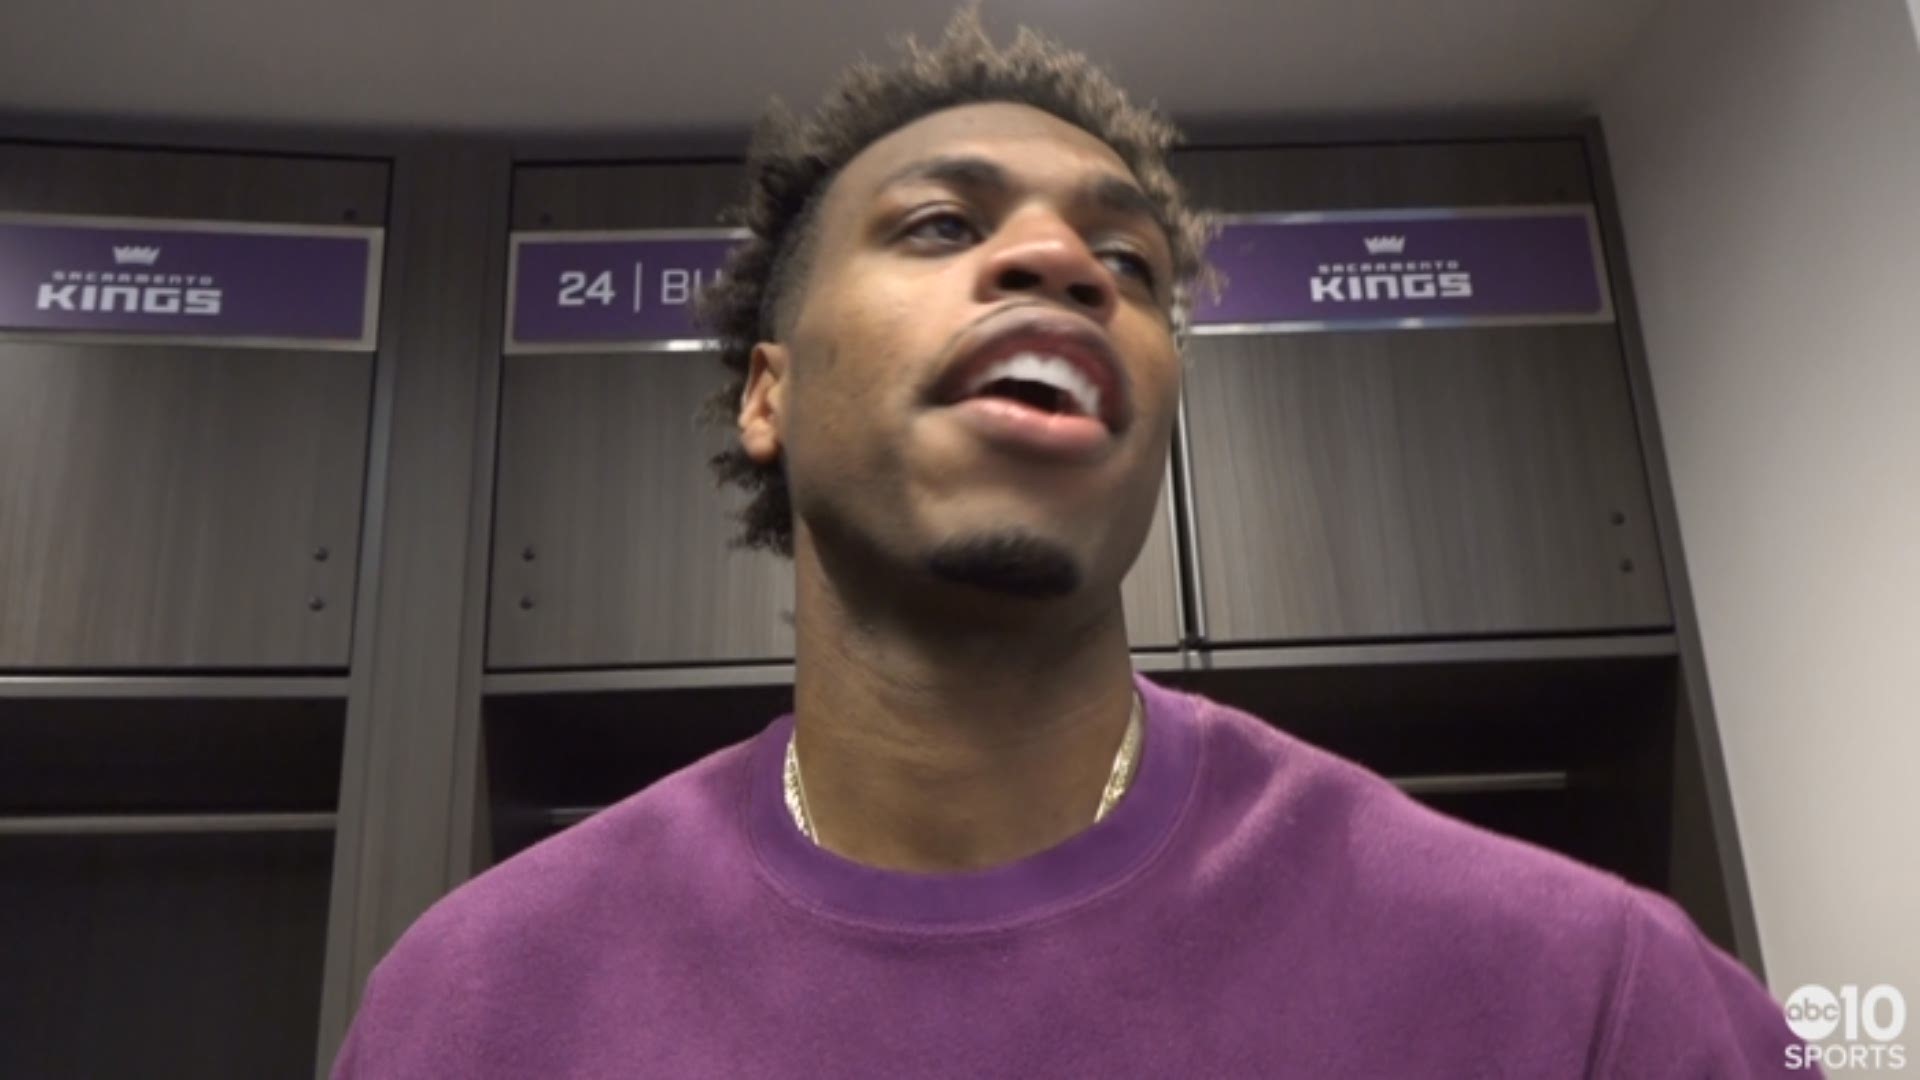 Kings guard Buddy Hield talks about the defensive mishap he made in the closing moments of Friday night's loss to the Golden State Warriors in Sacramento on Friday.